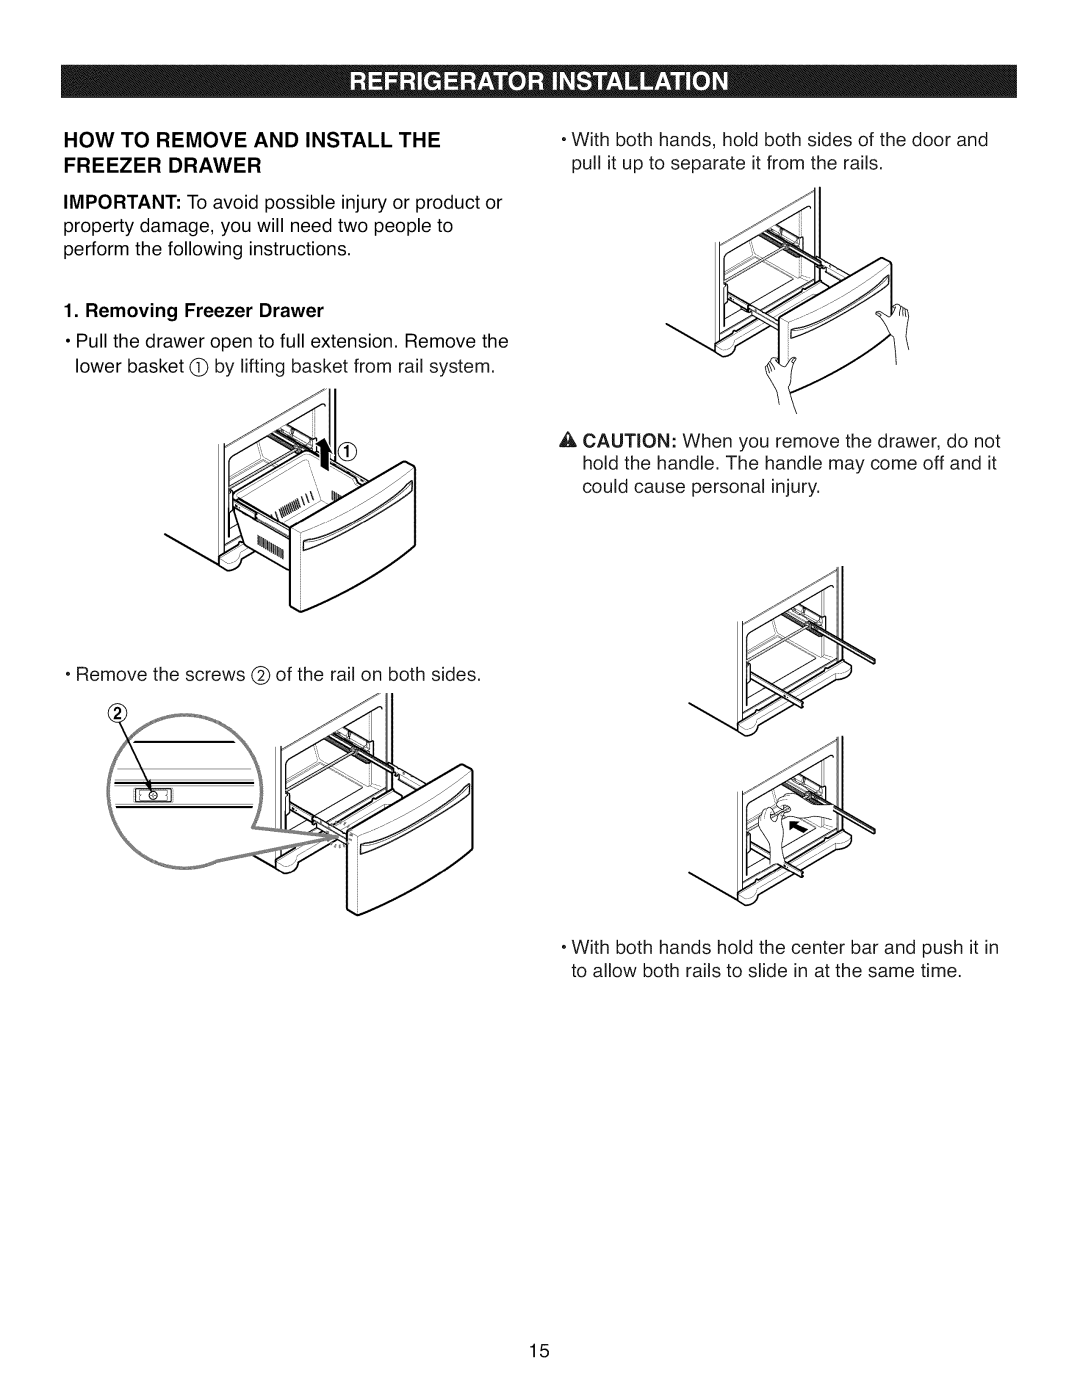 Kenmore 795.7105 manual How To Remove And Install The Freezer Drawer, Removing Freezer Drawer 